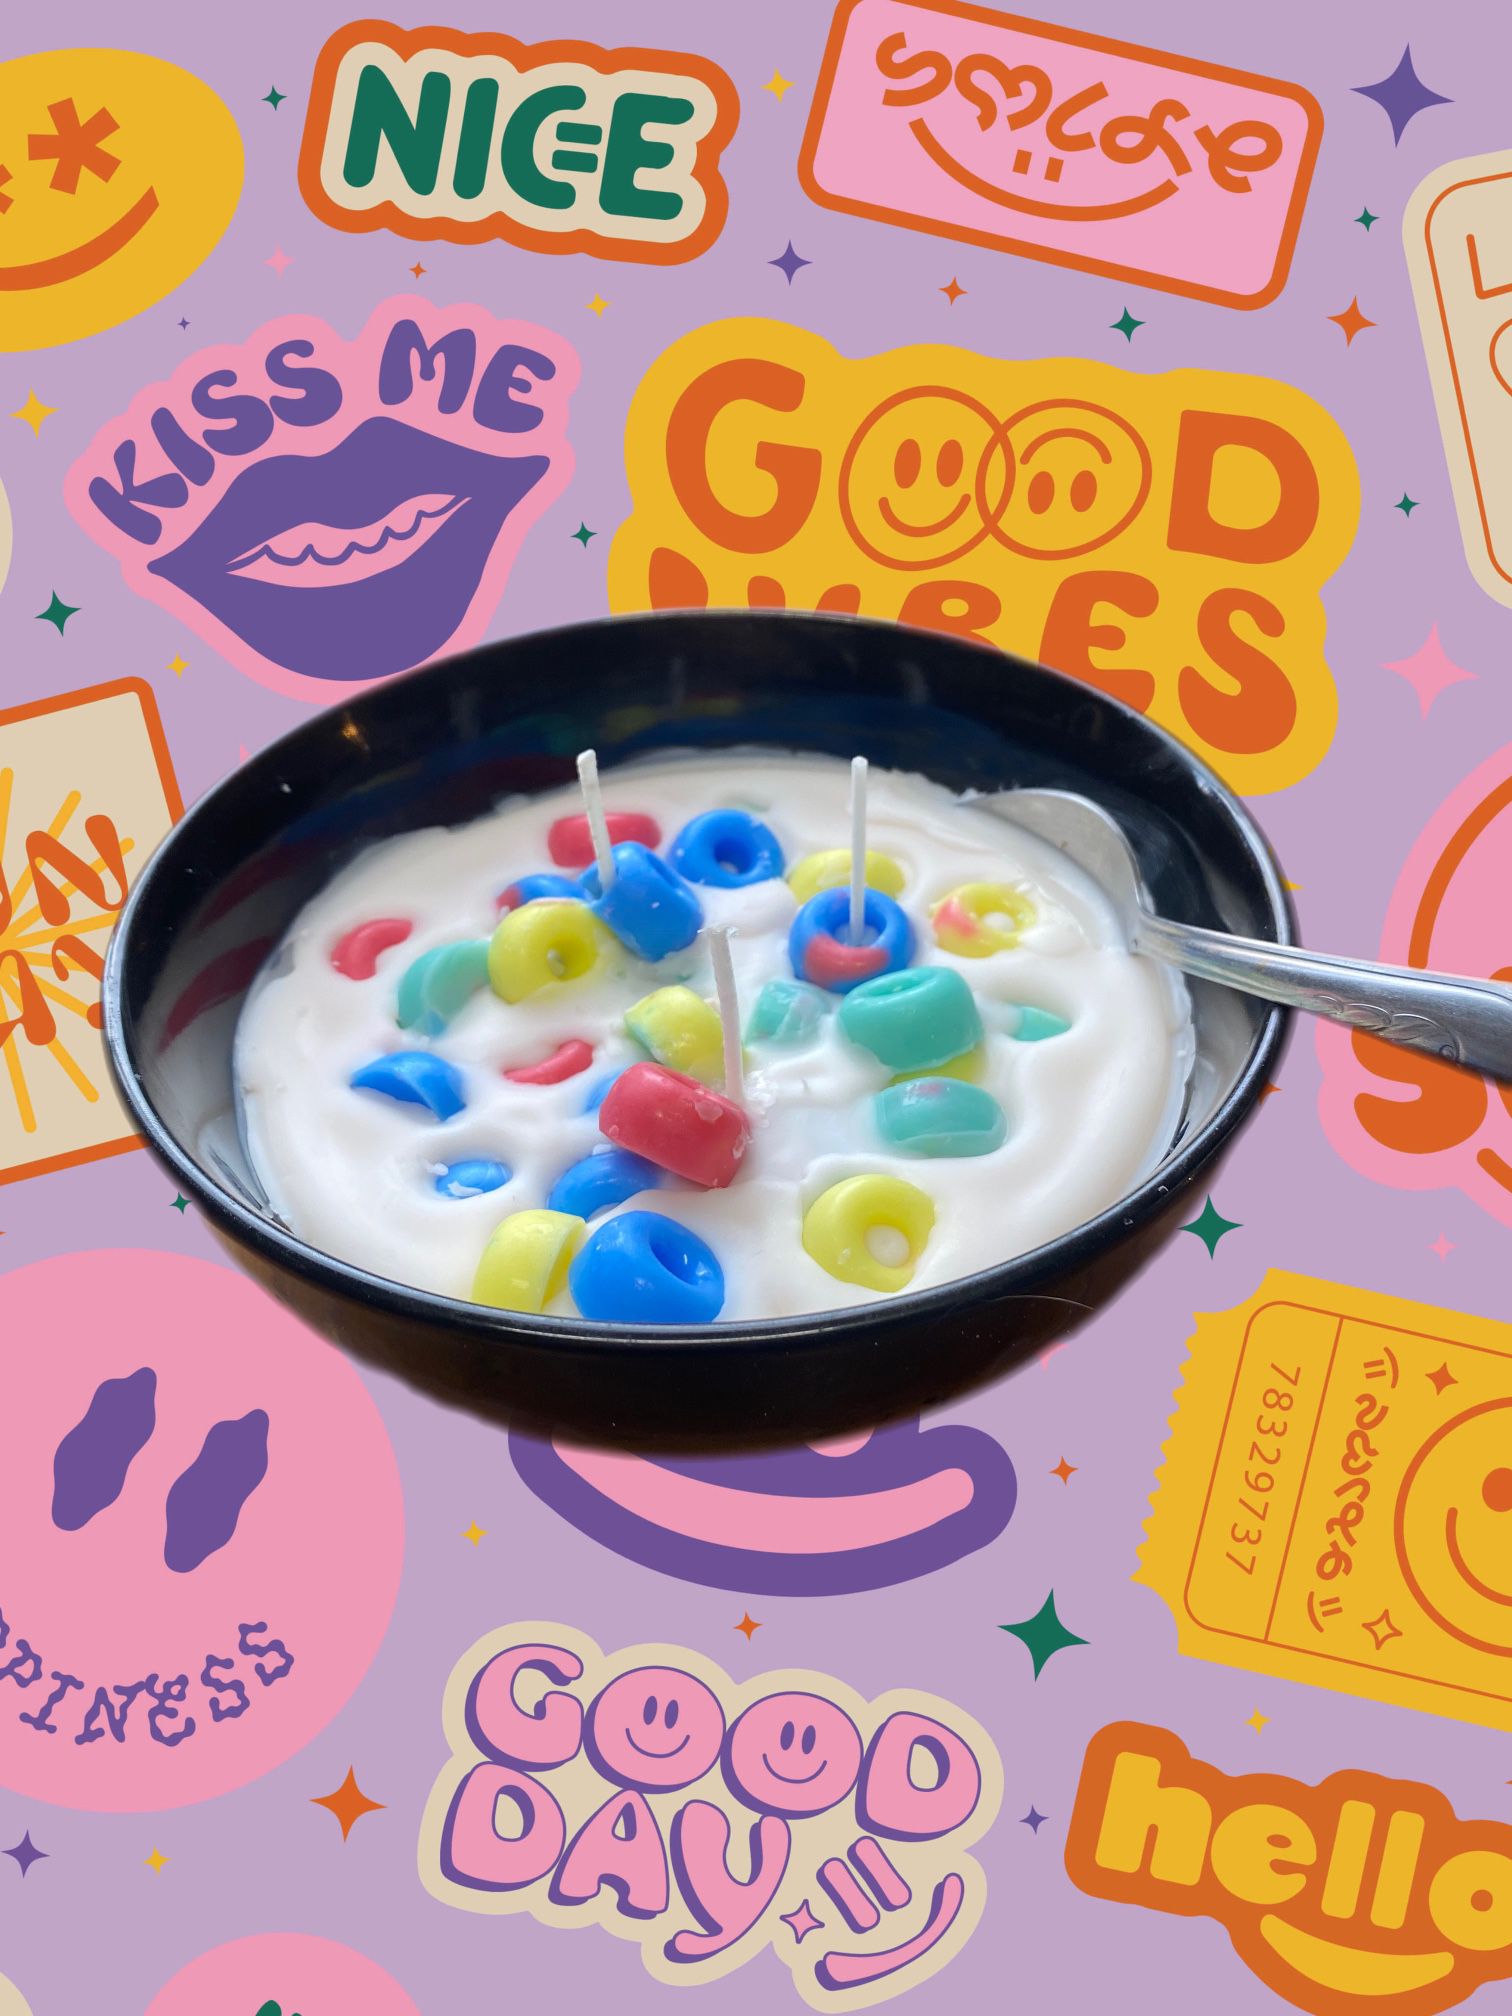 Large Bowl of Fruit Loop Cereal 3 Wick Candle